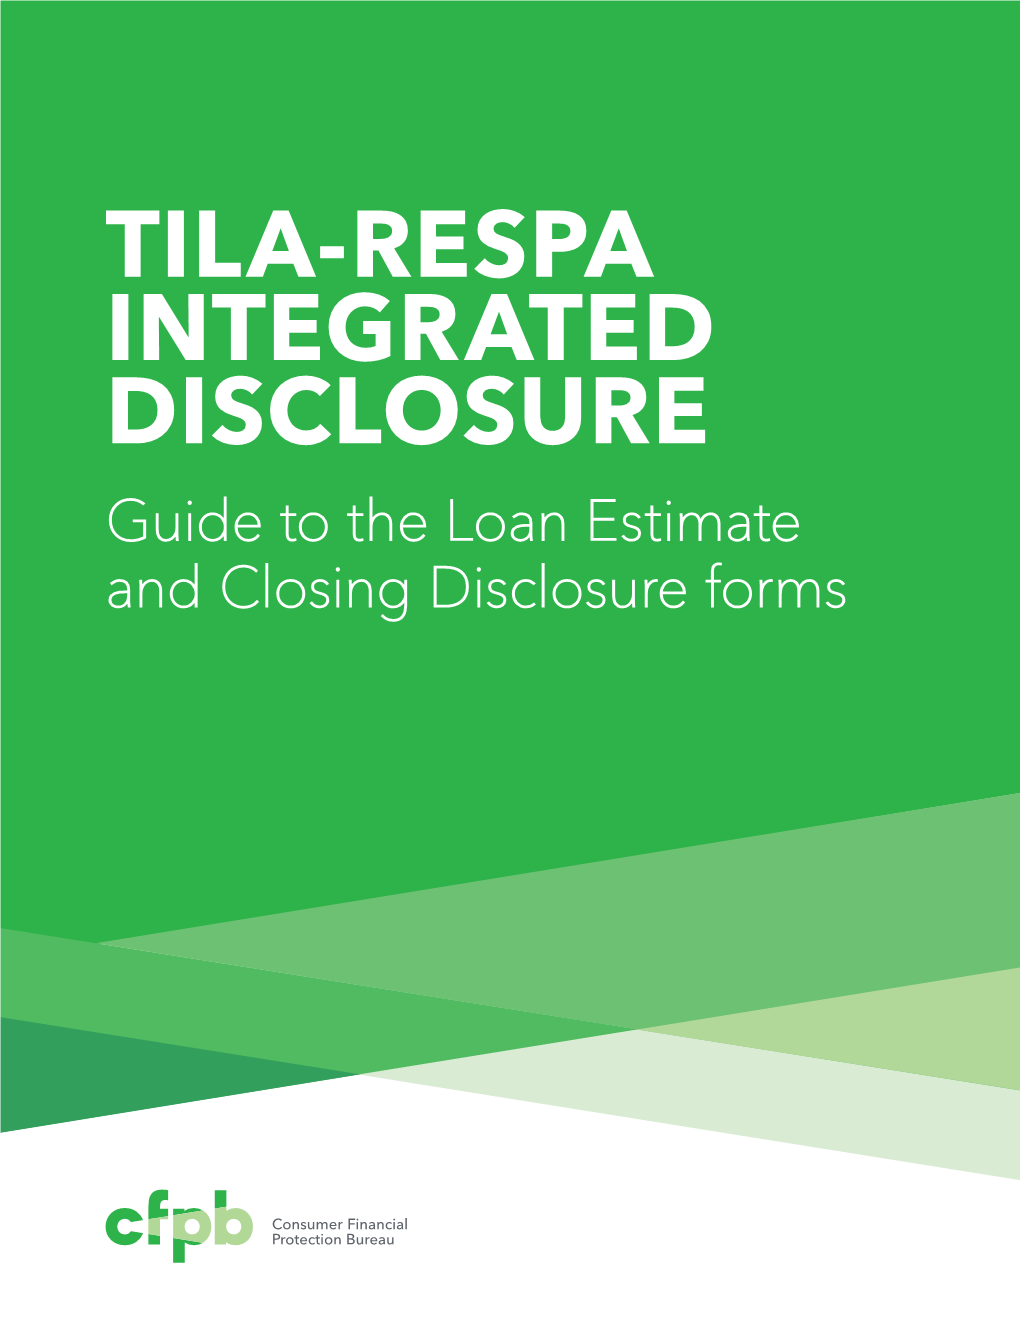 TILA-RESPA INTEGRATED DISCLOSURE Guide to the Loan Estimate and Closing Disclosure Forms